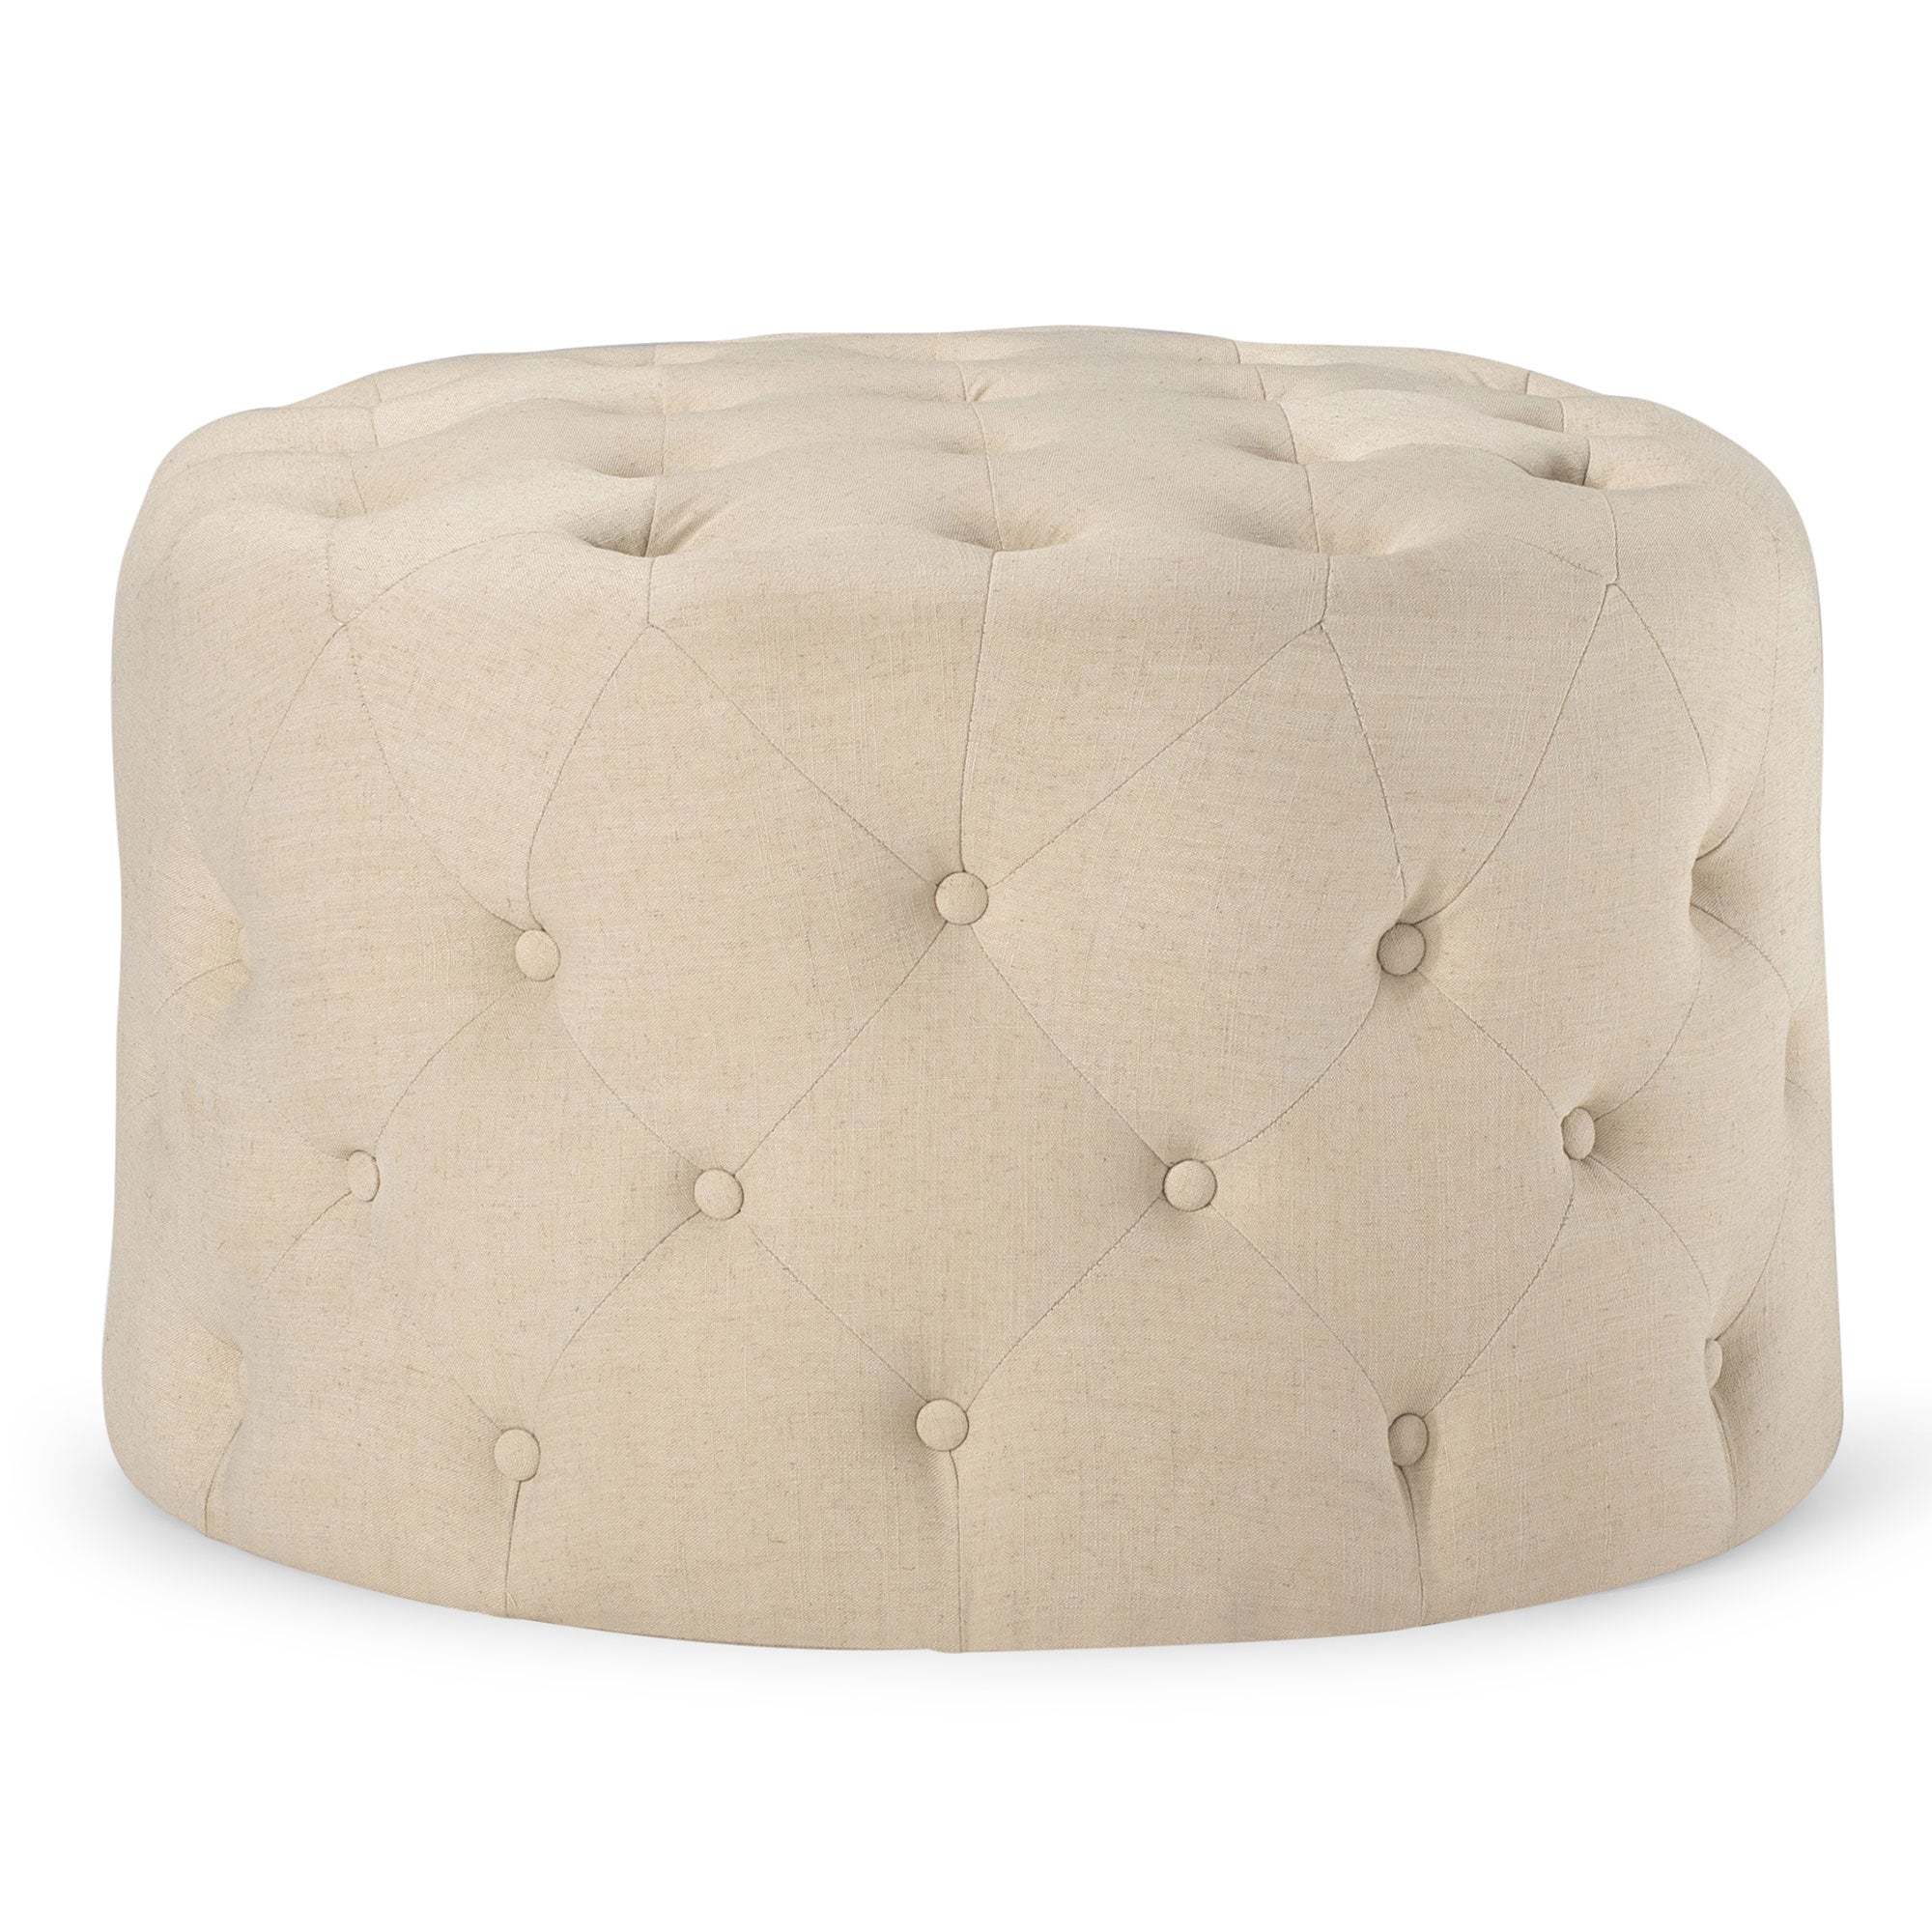 Marcy Classical Round Ottoman in Taupe Fabric Upholstery in Ottomans & Benches by Maven Lane